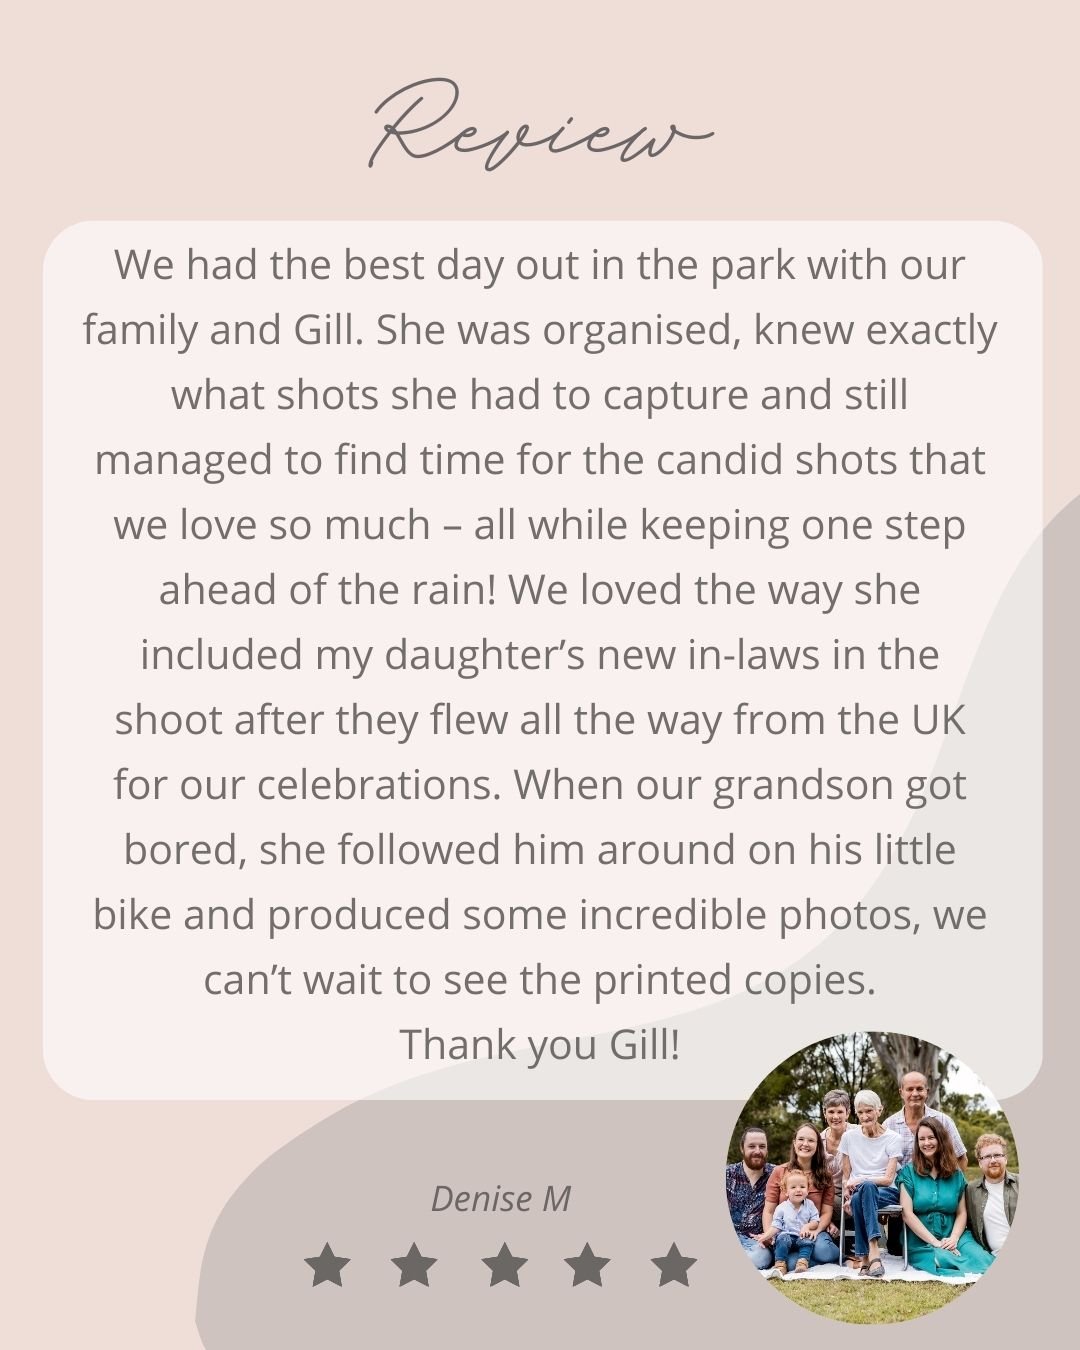 It really warms my heart to receive such lovely feedback from incredible clients like @dfromz 🥰
Thank you Denise for taking the time to share your experience from our family photography session. It is greatly appreciated! 🙏
Capturing precious famil